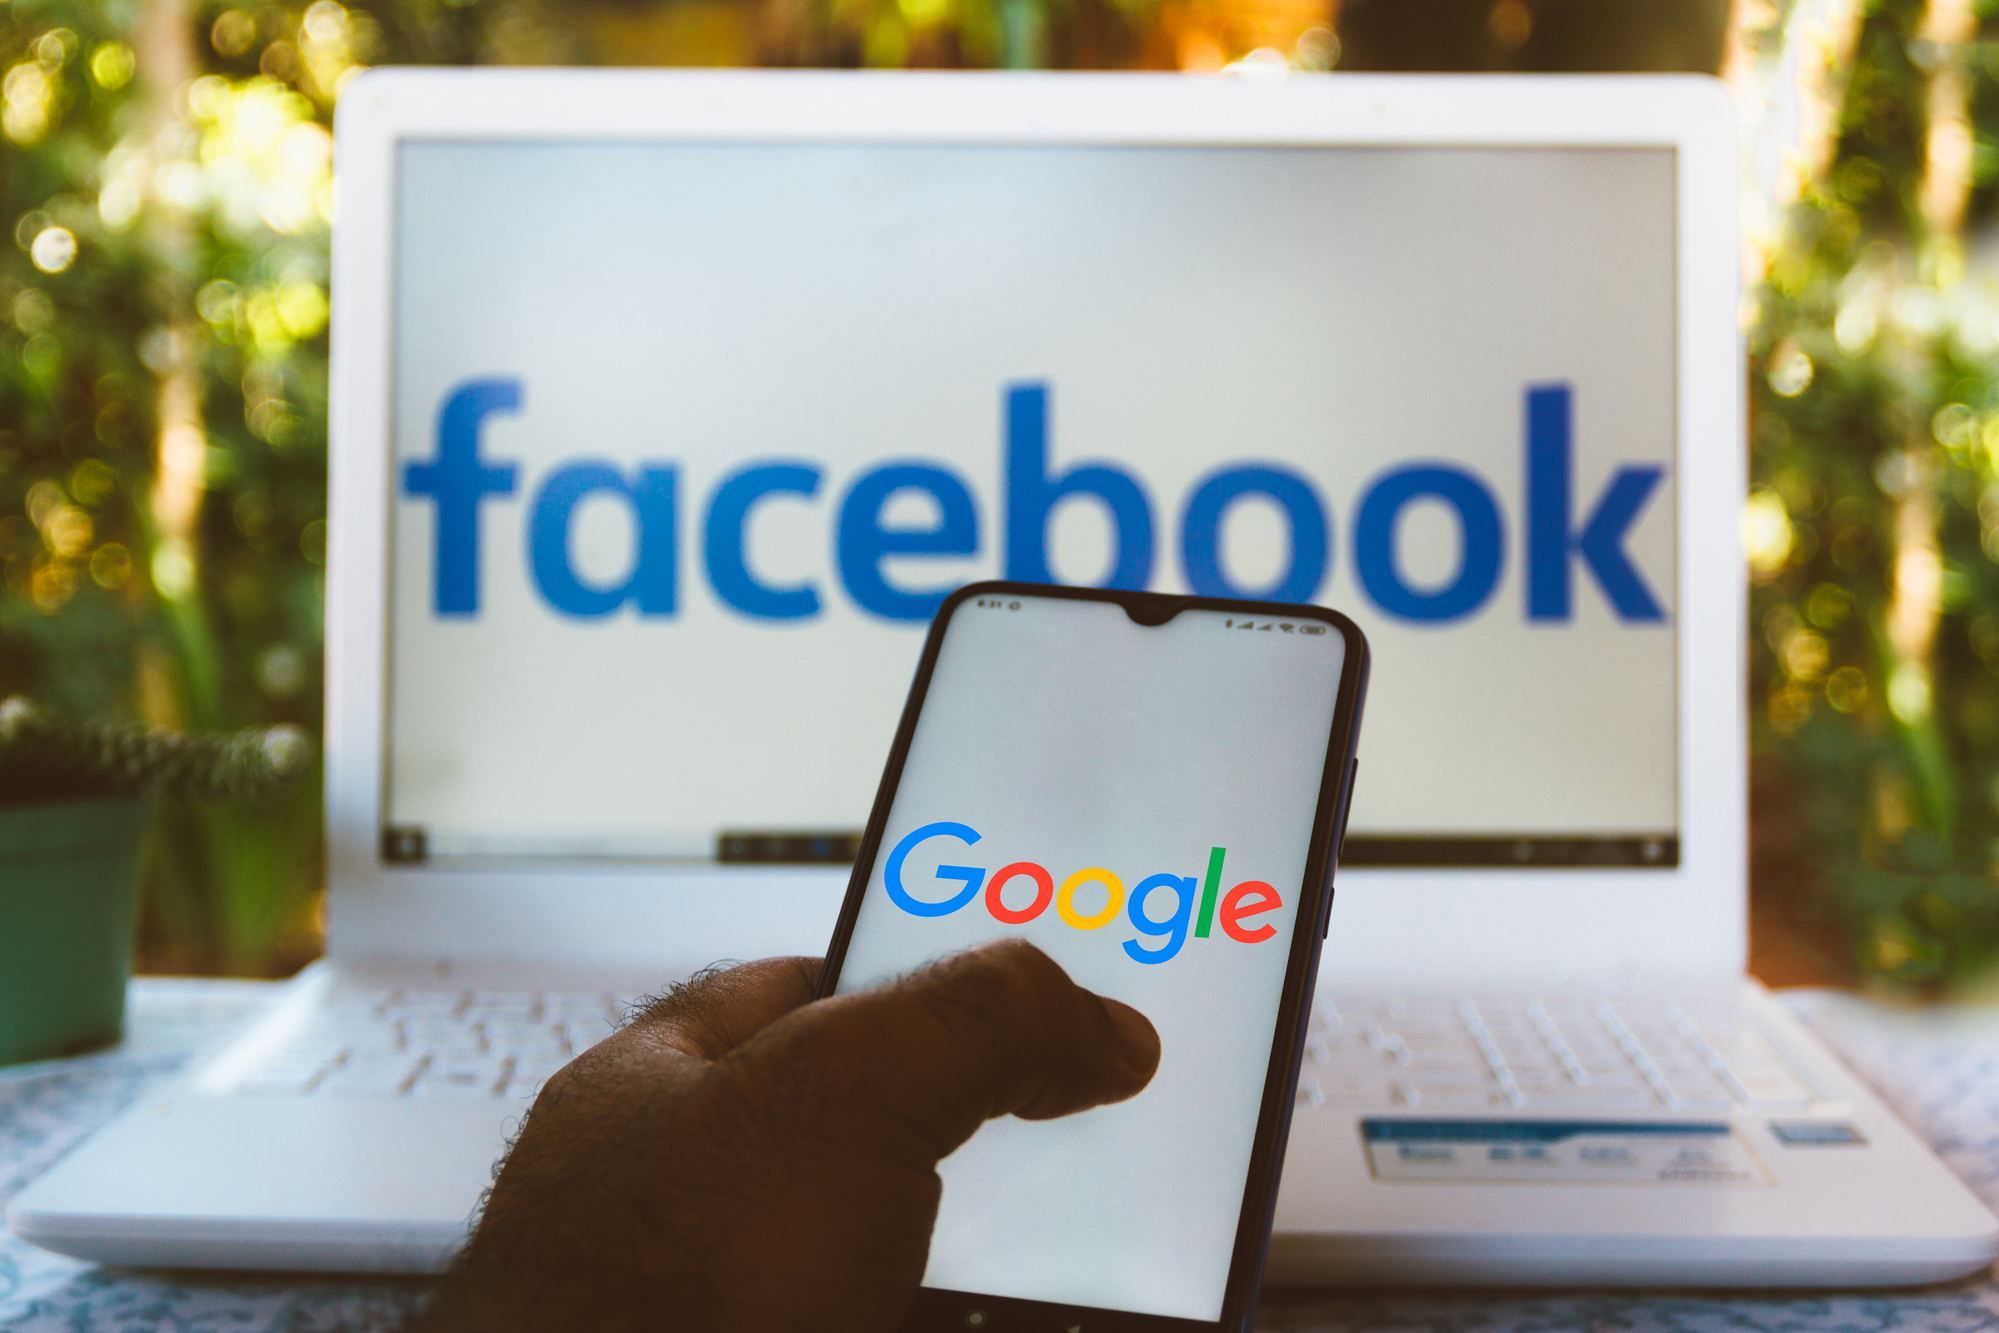 Facebook, eBay and Google have teamed up to urge the Supreme Court to reverse a decision they say allows costly privacy class action lawsuits to proceed.